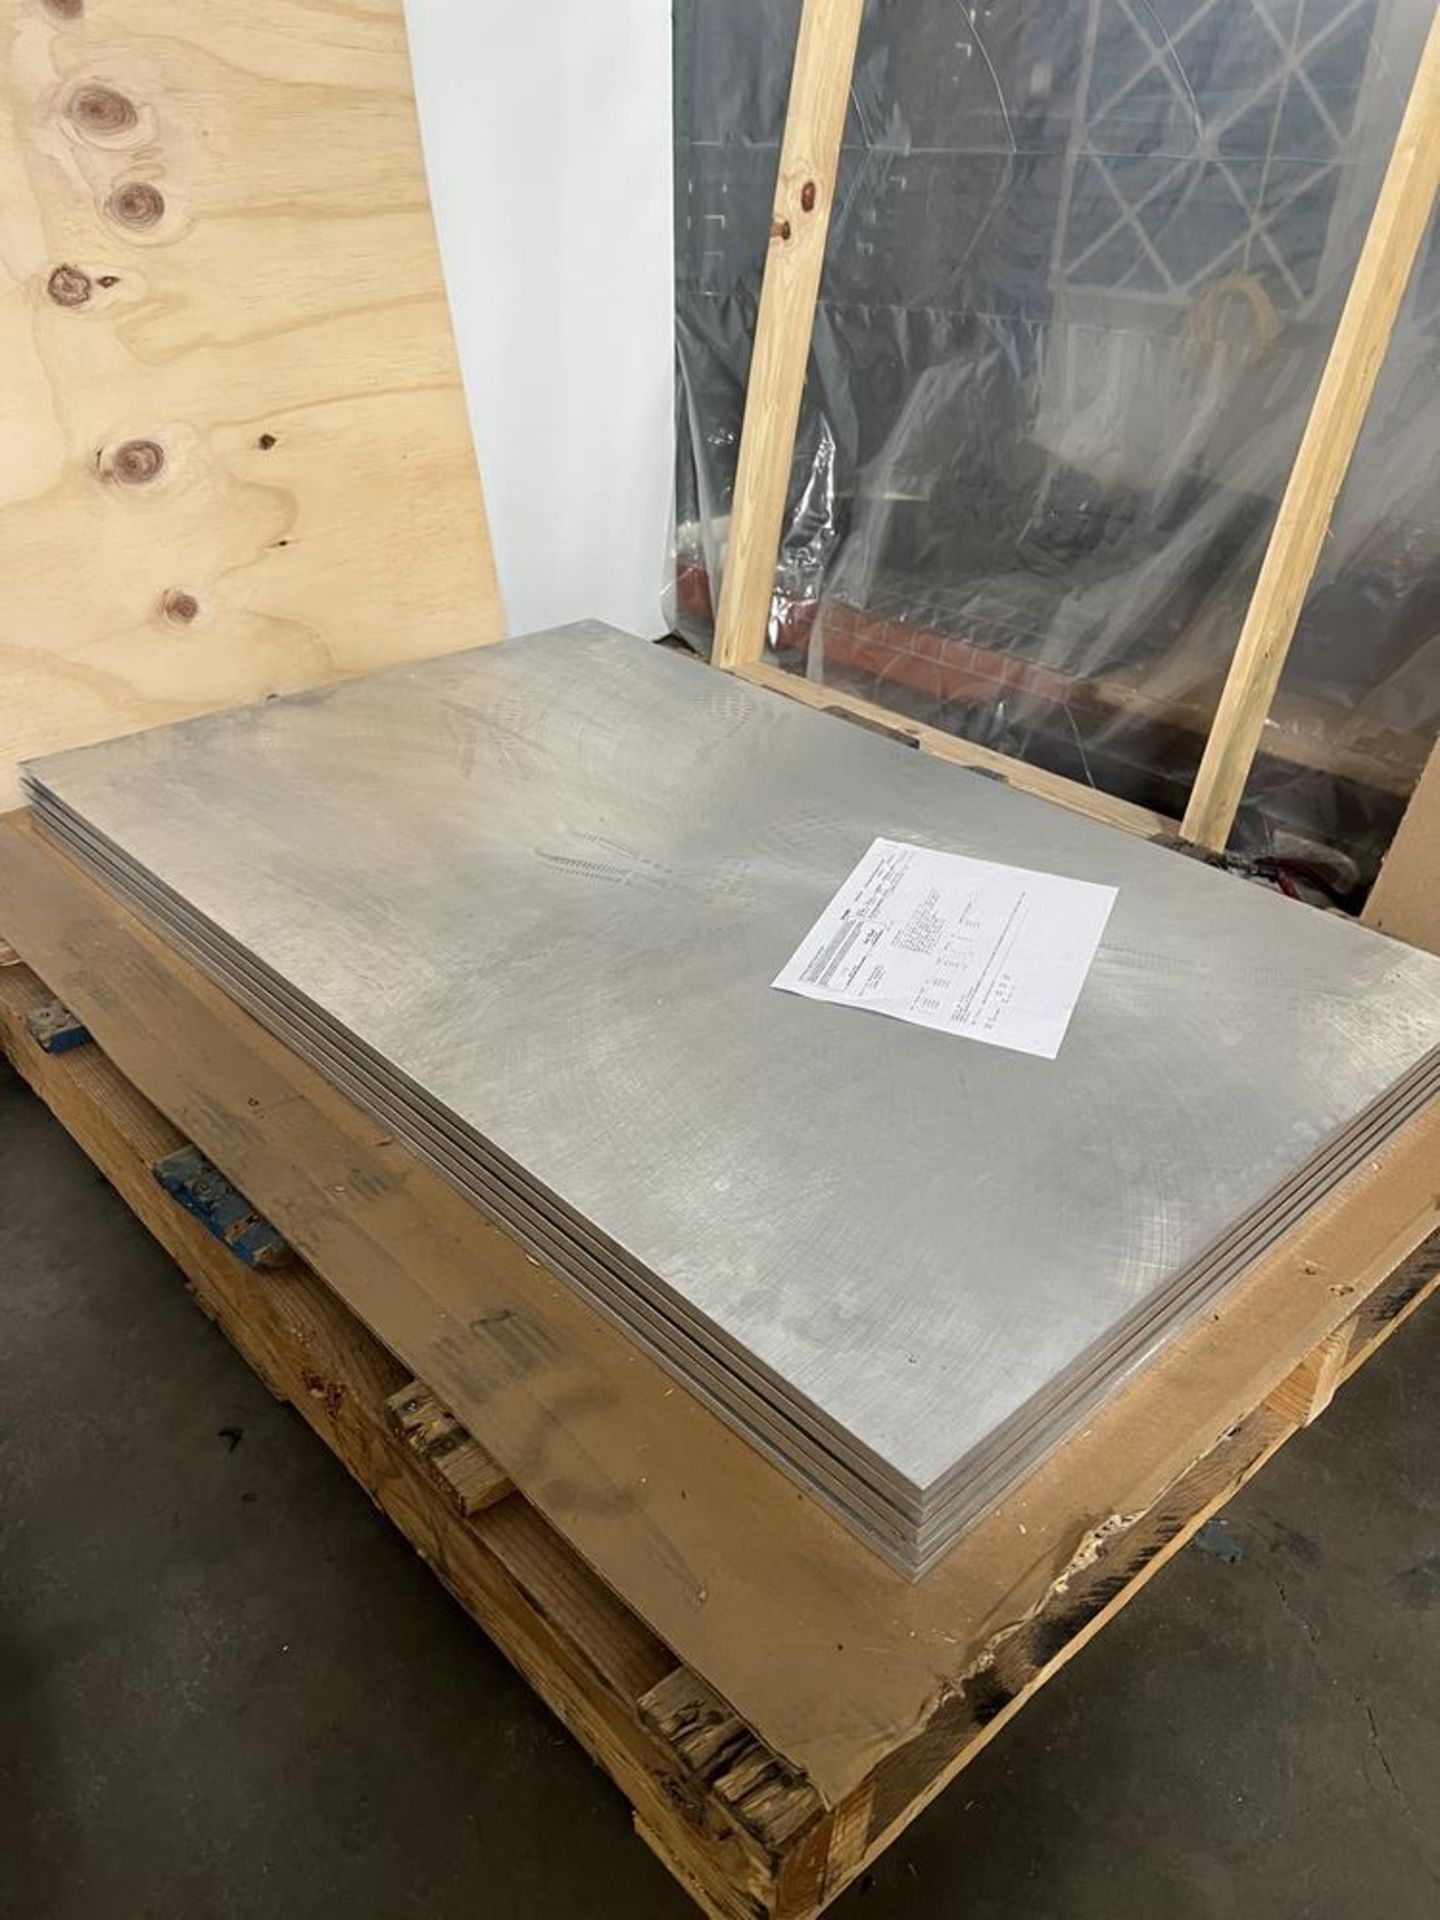 (5) Precision Ground Aluminum Plate 44" x 28" x 1/2" With Certified Inspection Report - Bild 2 aus 4